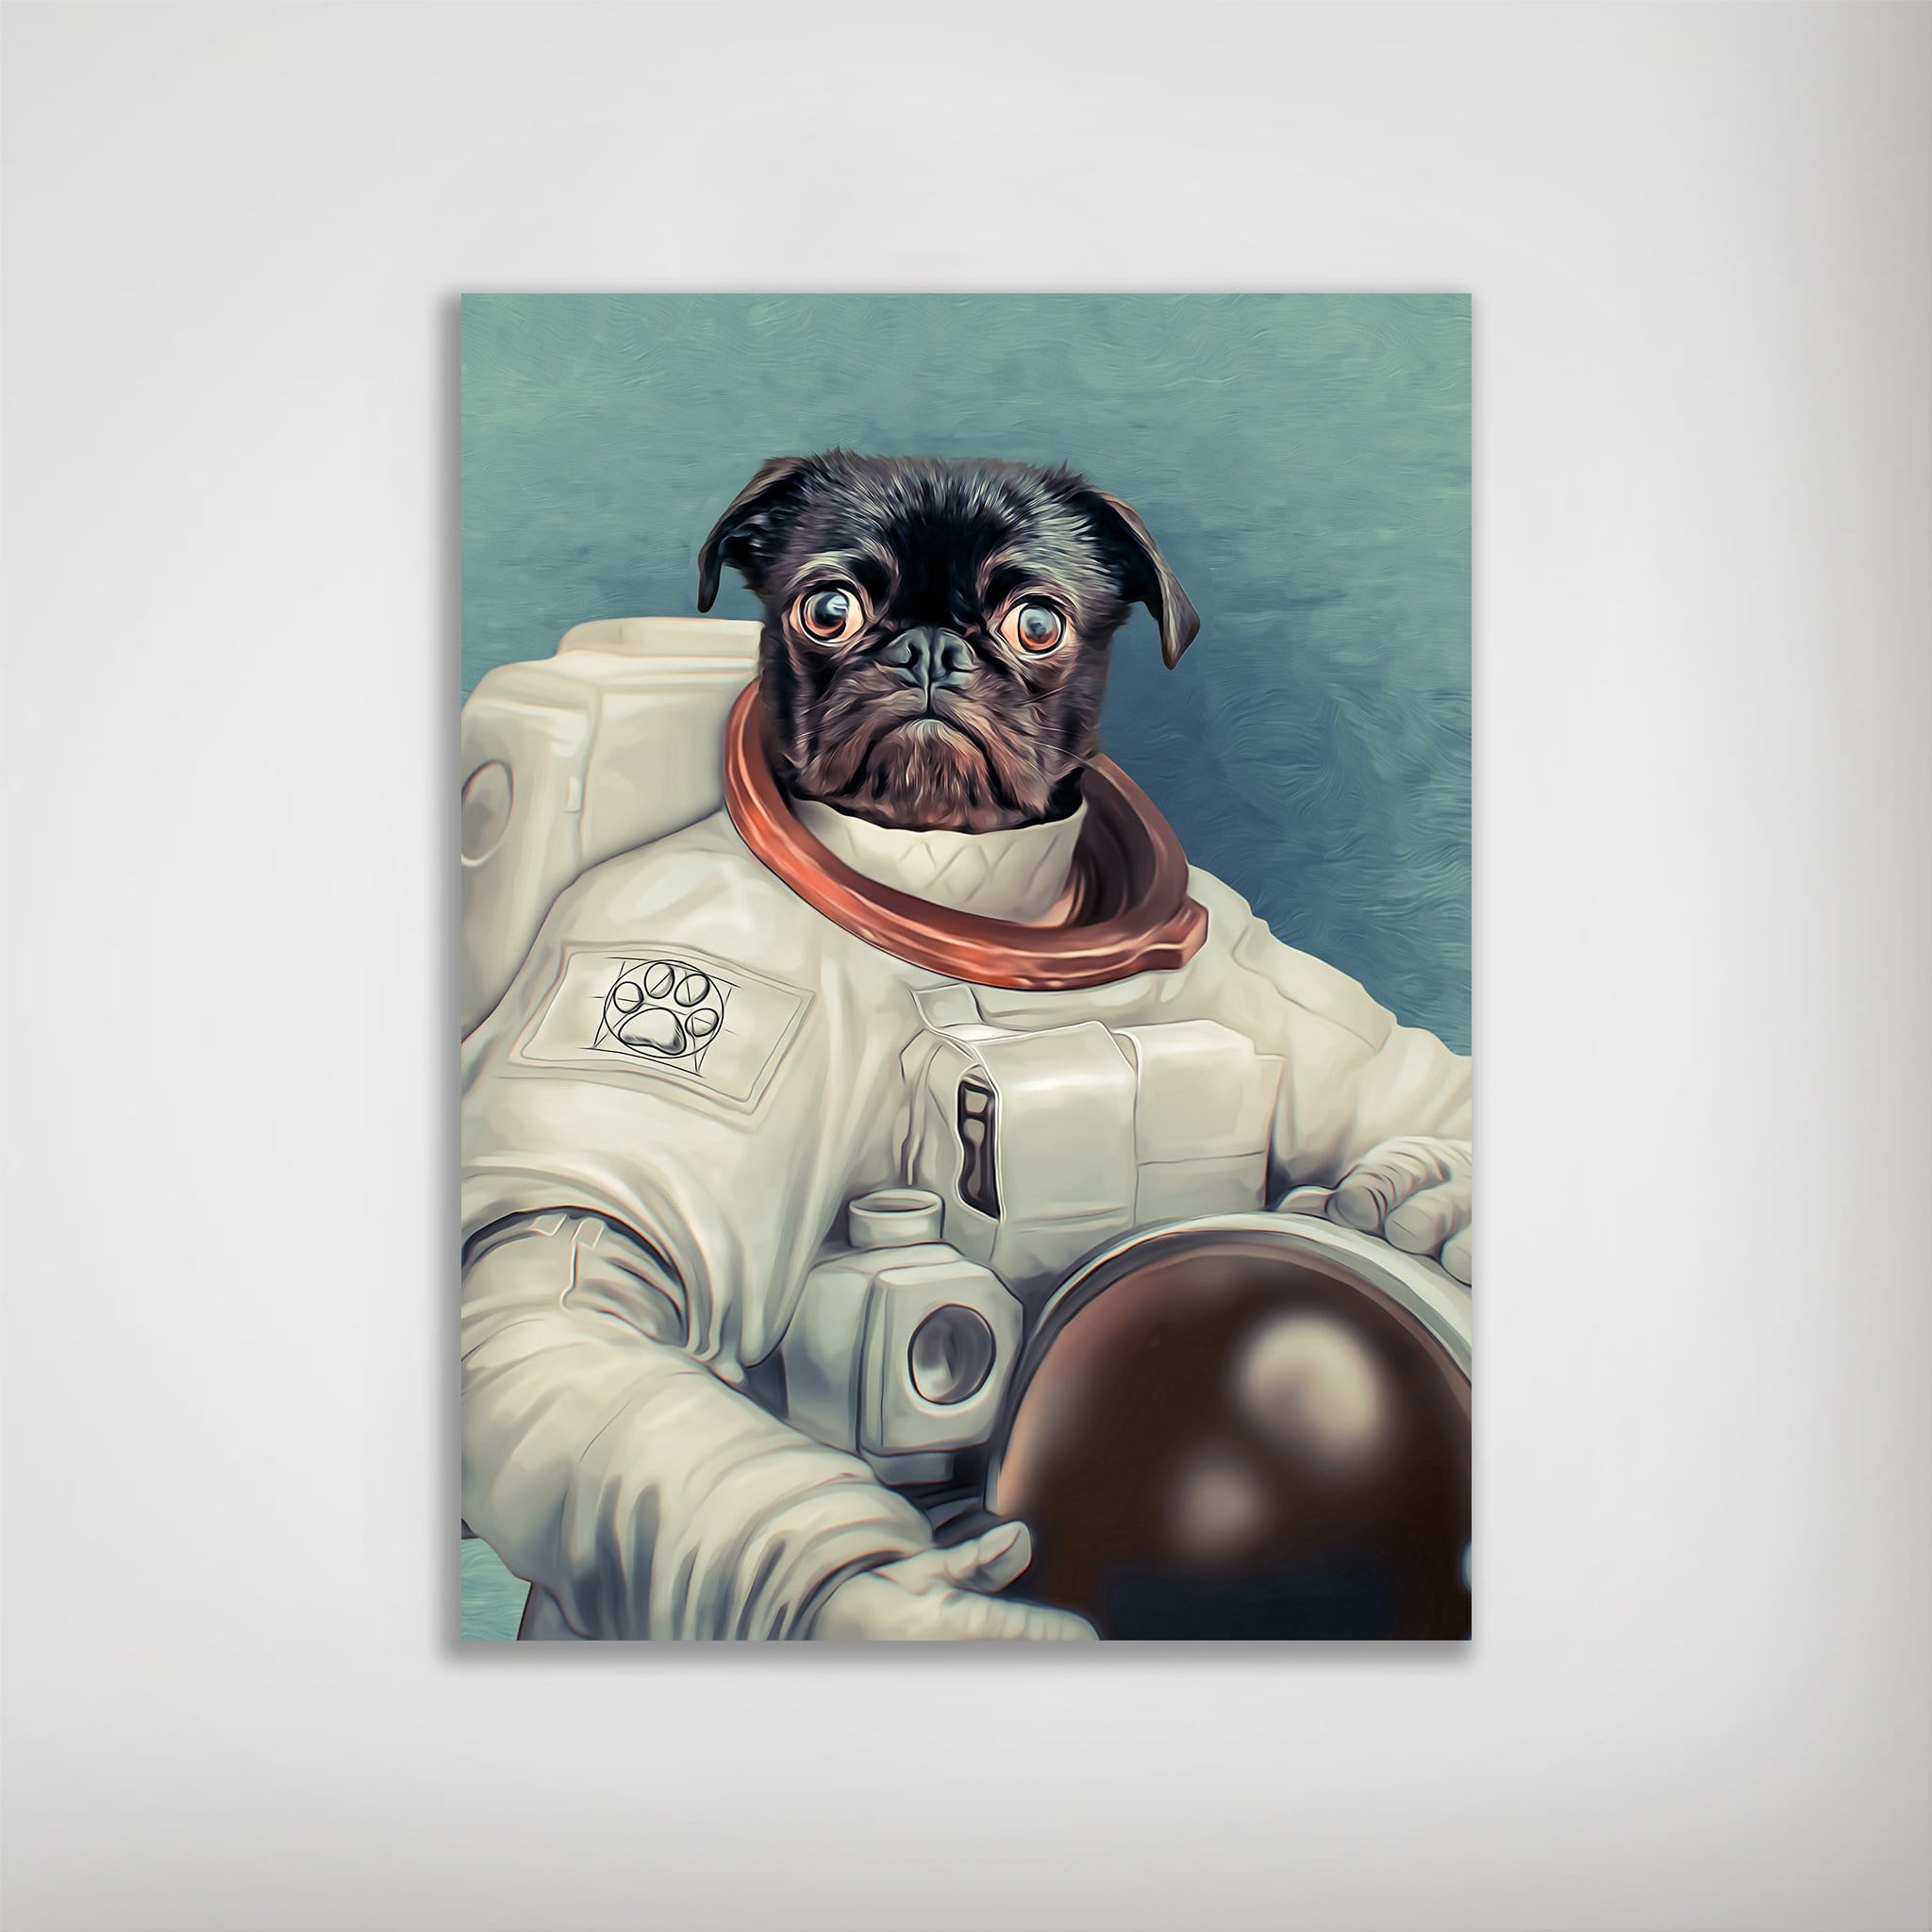 The Astronaut: Personalized Poster